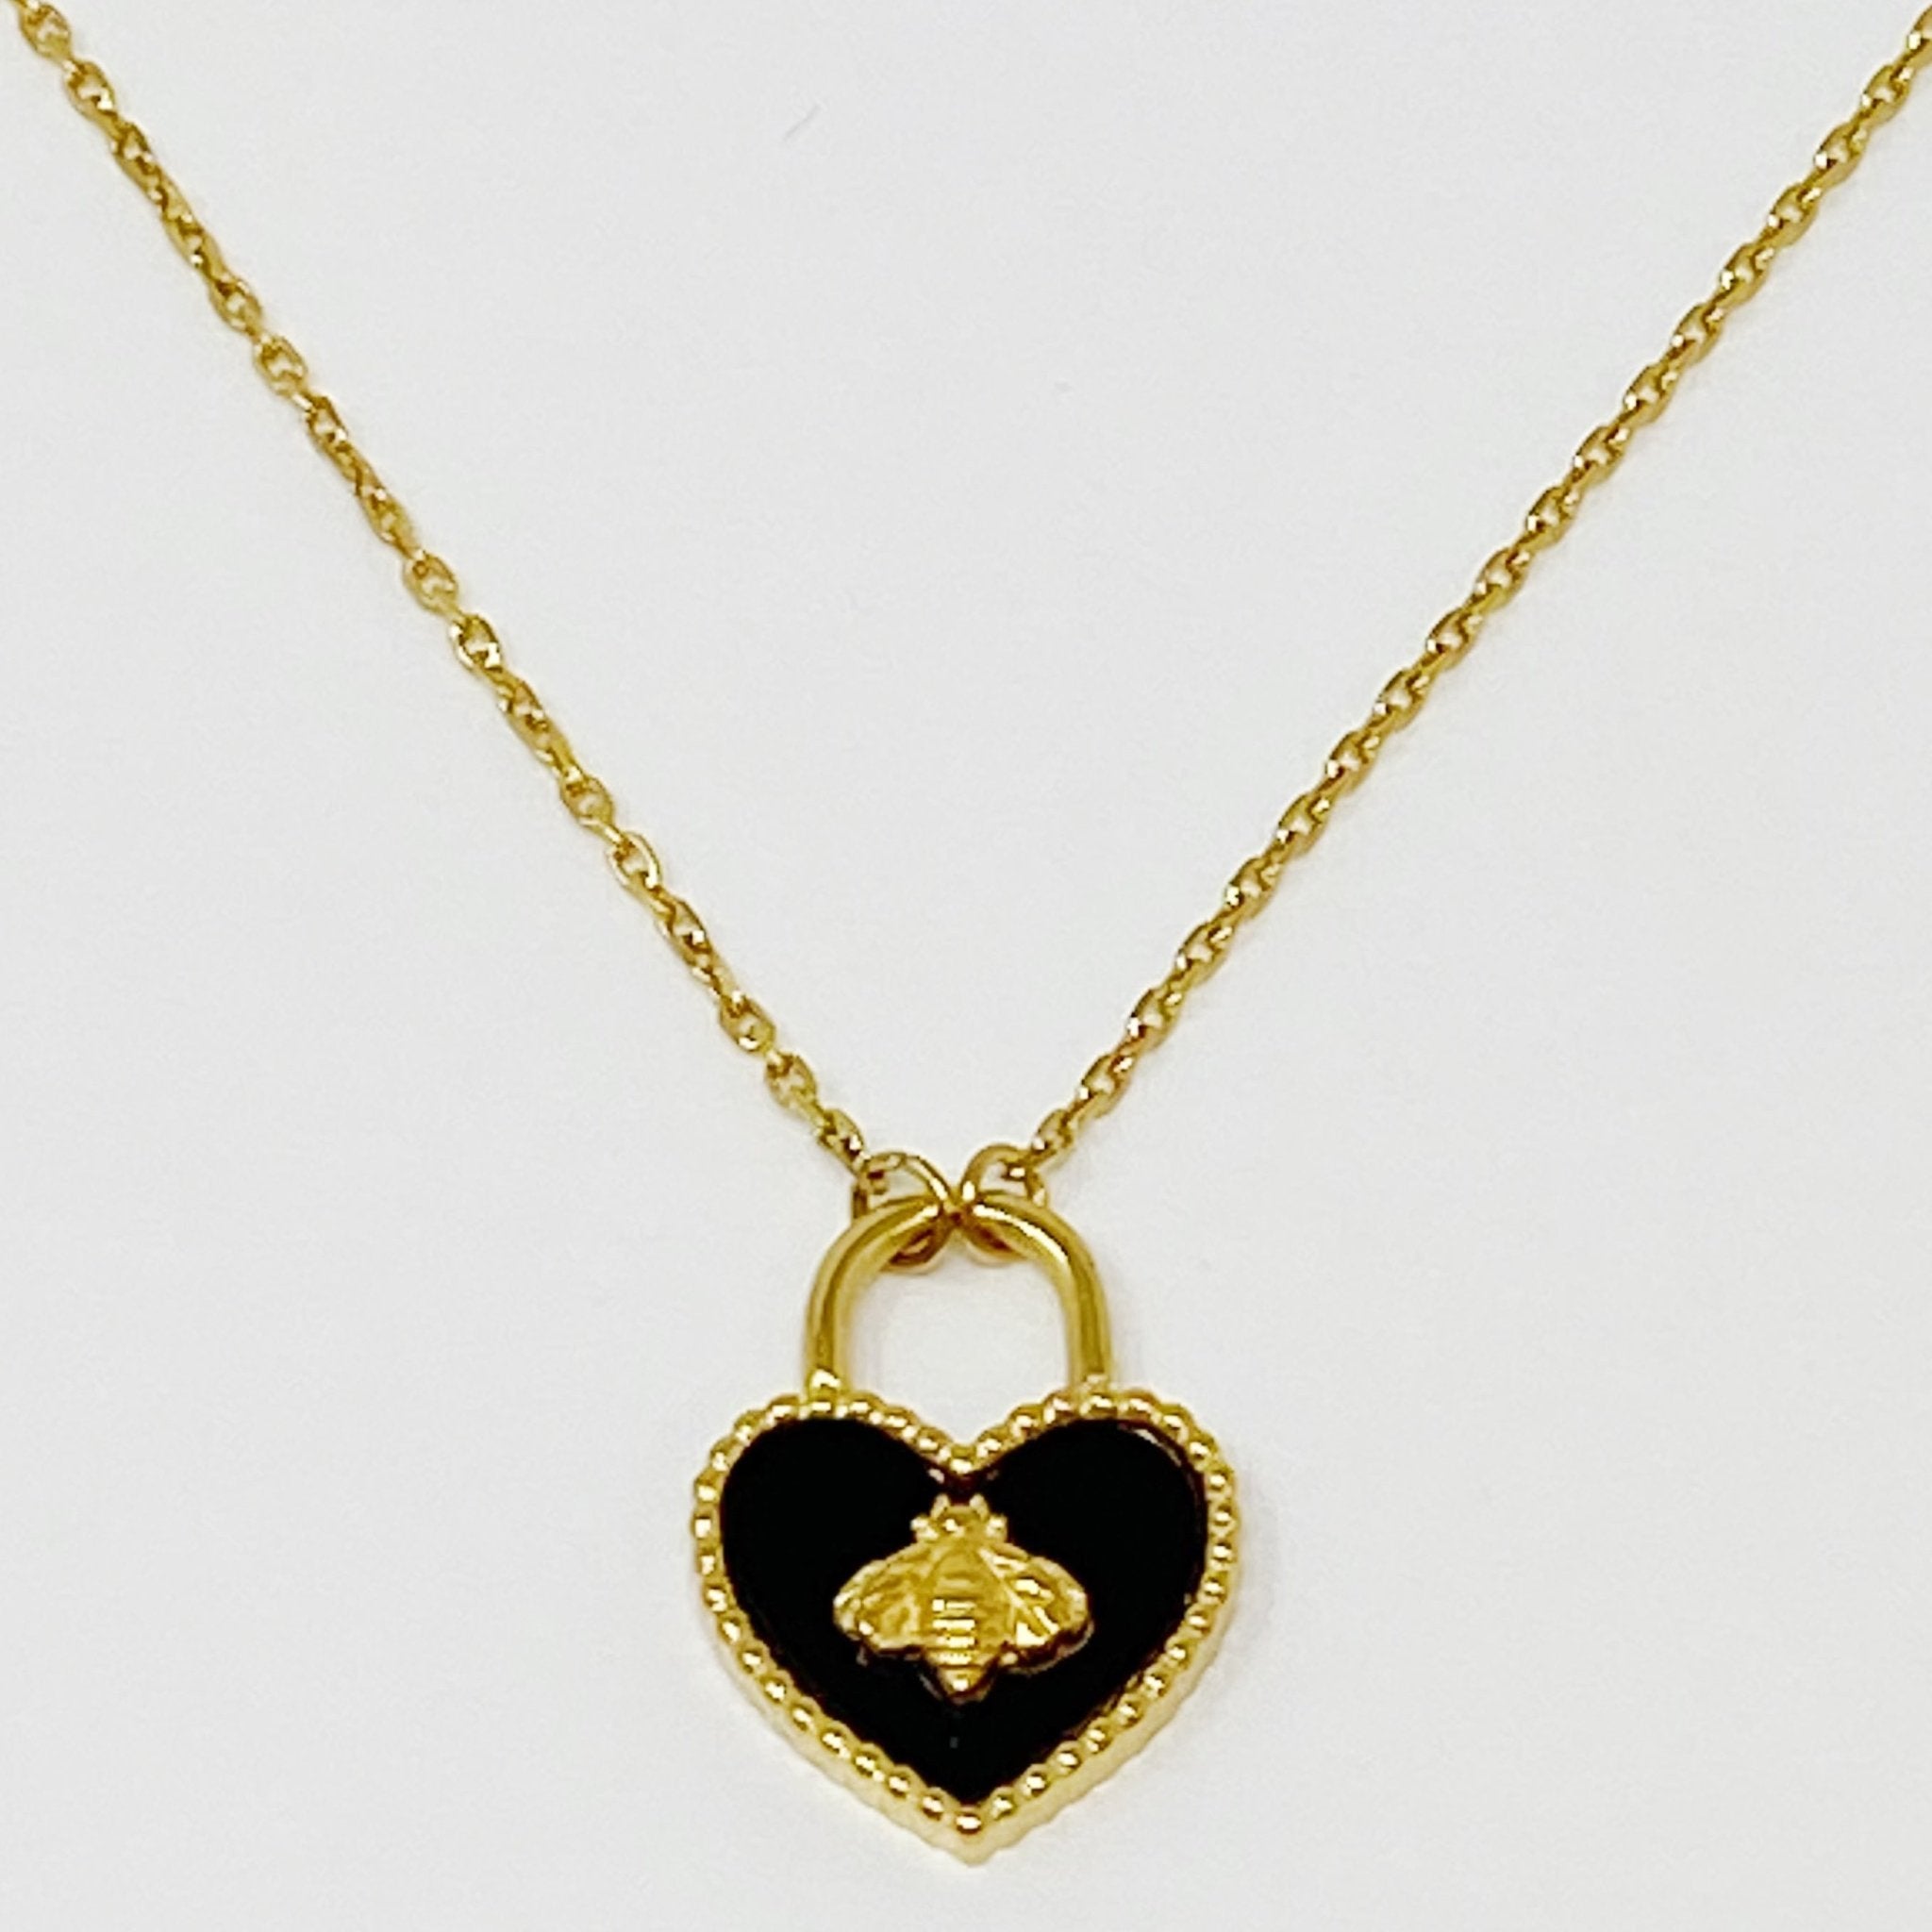 Bee Heartful Necklace - The Kindness Cause